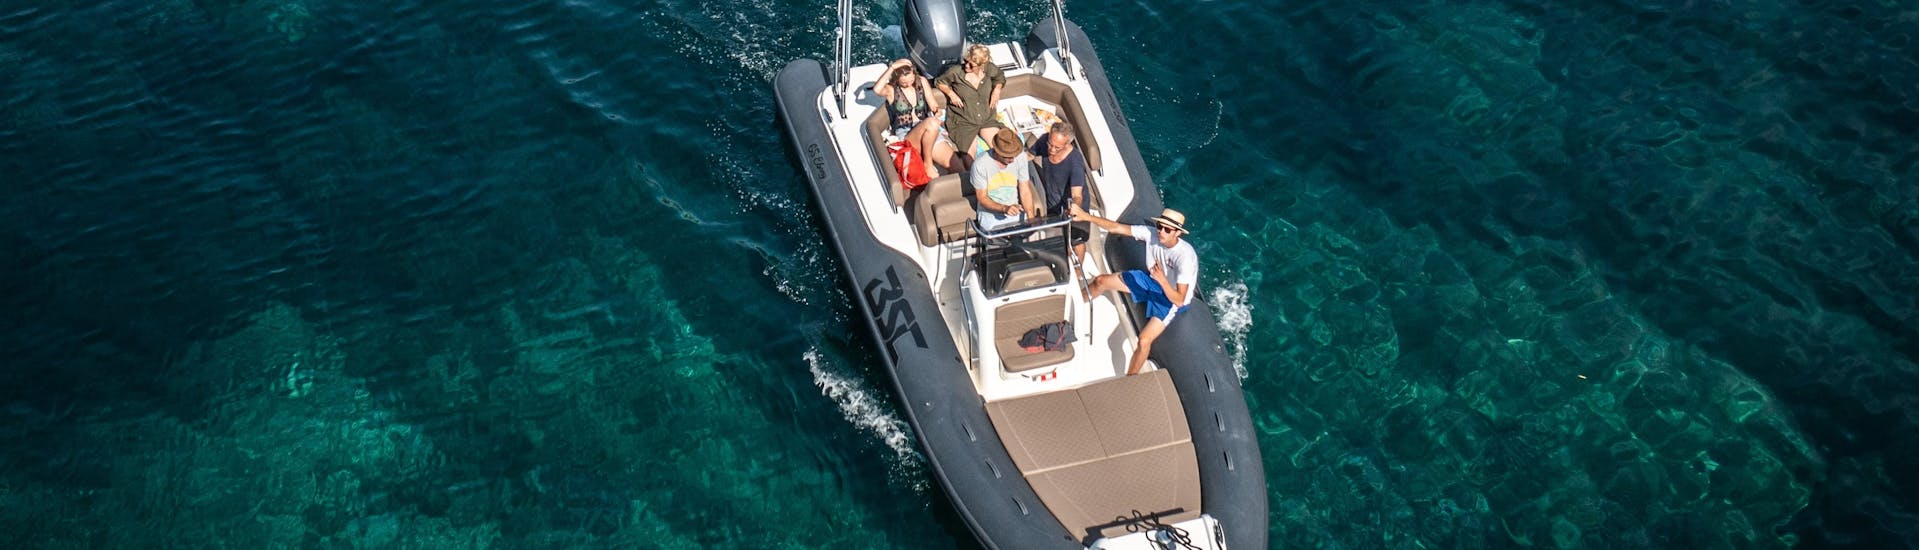 People on a trip during the Boat Rental in Cargèse (up to 9 people) with Licence with Nautic Evasion Cargèse.